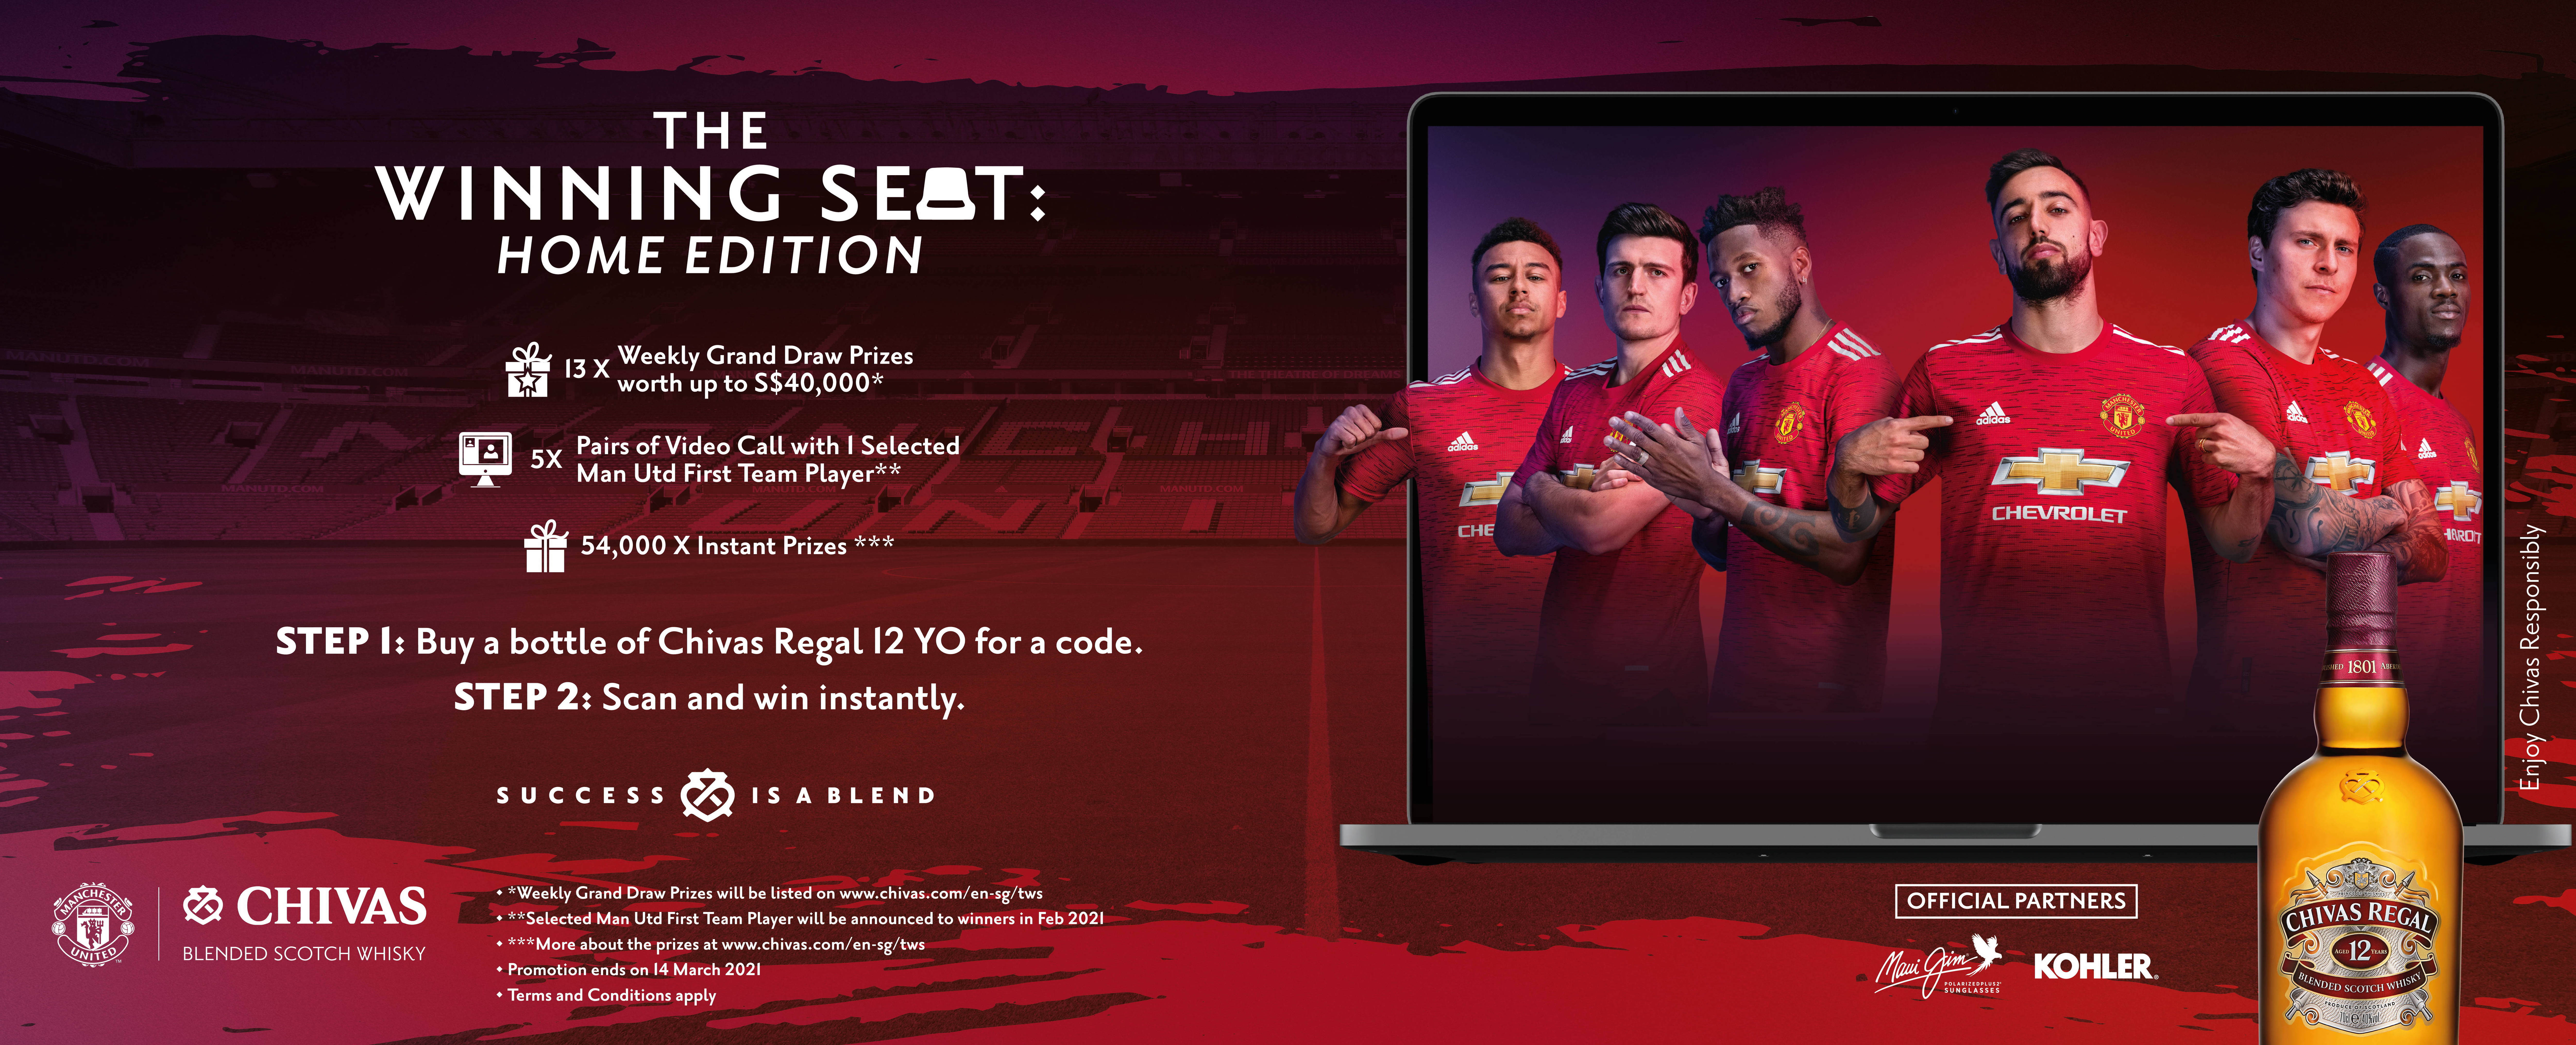 SCORE YOUR WINNING SEAT TO MEET MANCHESTER UNITED WITH CHIVAS REGAL